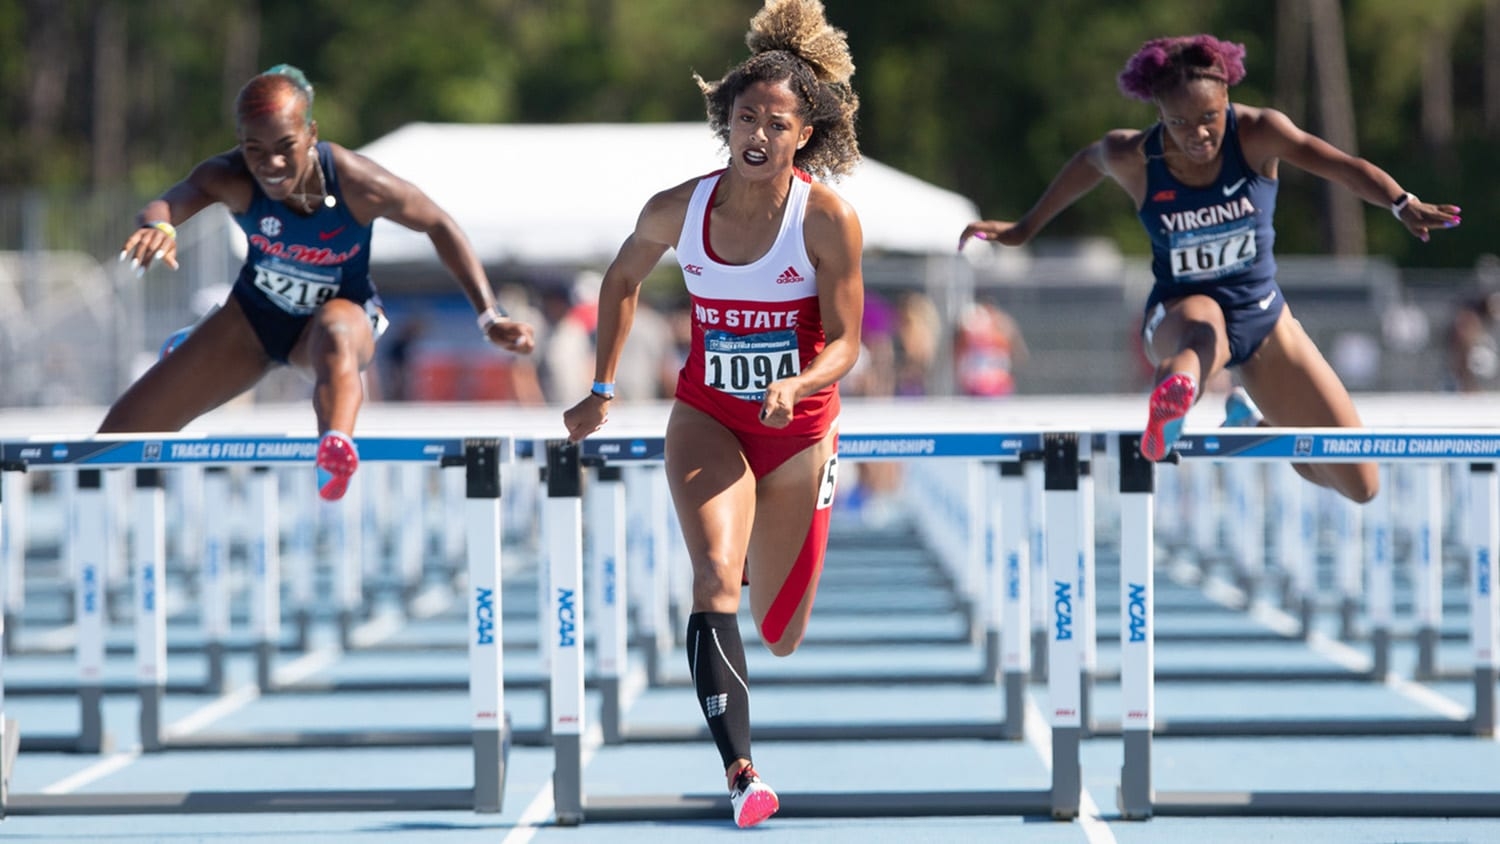 Gabrielle Cunningham jumps over a hurdle at a track and field event.